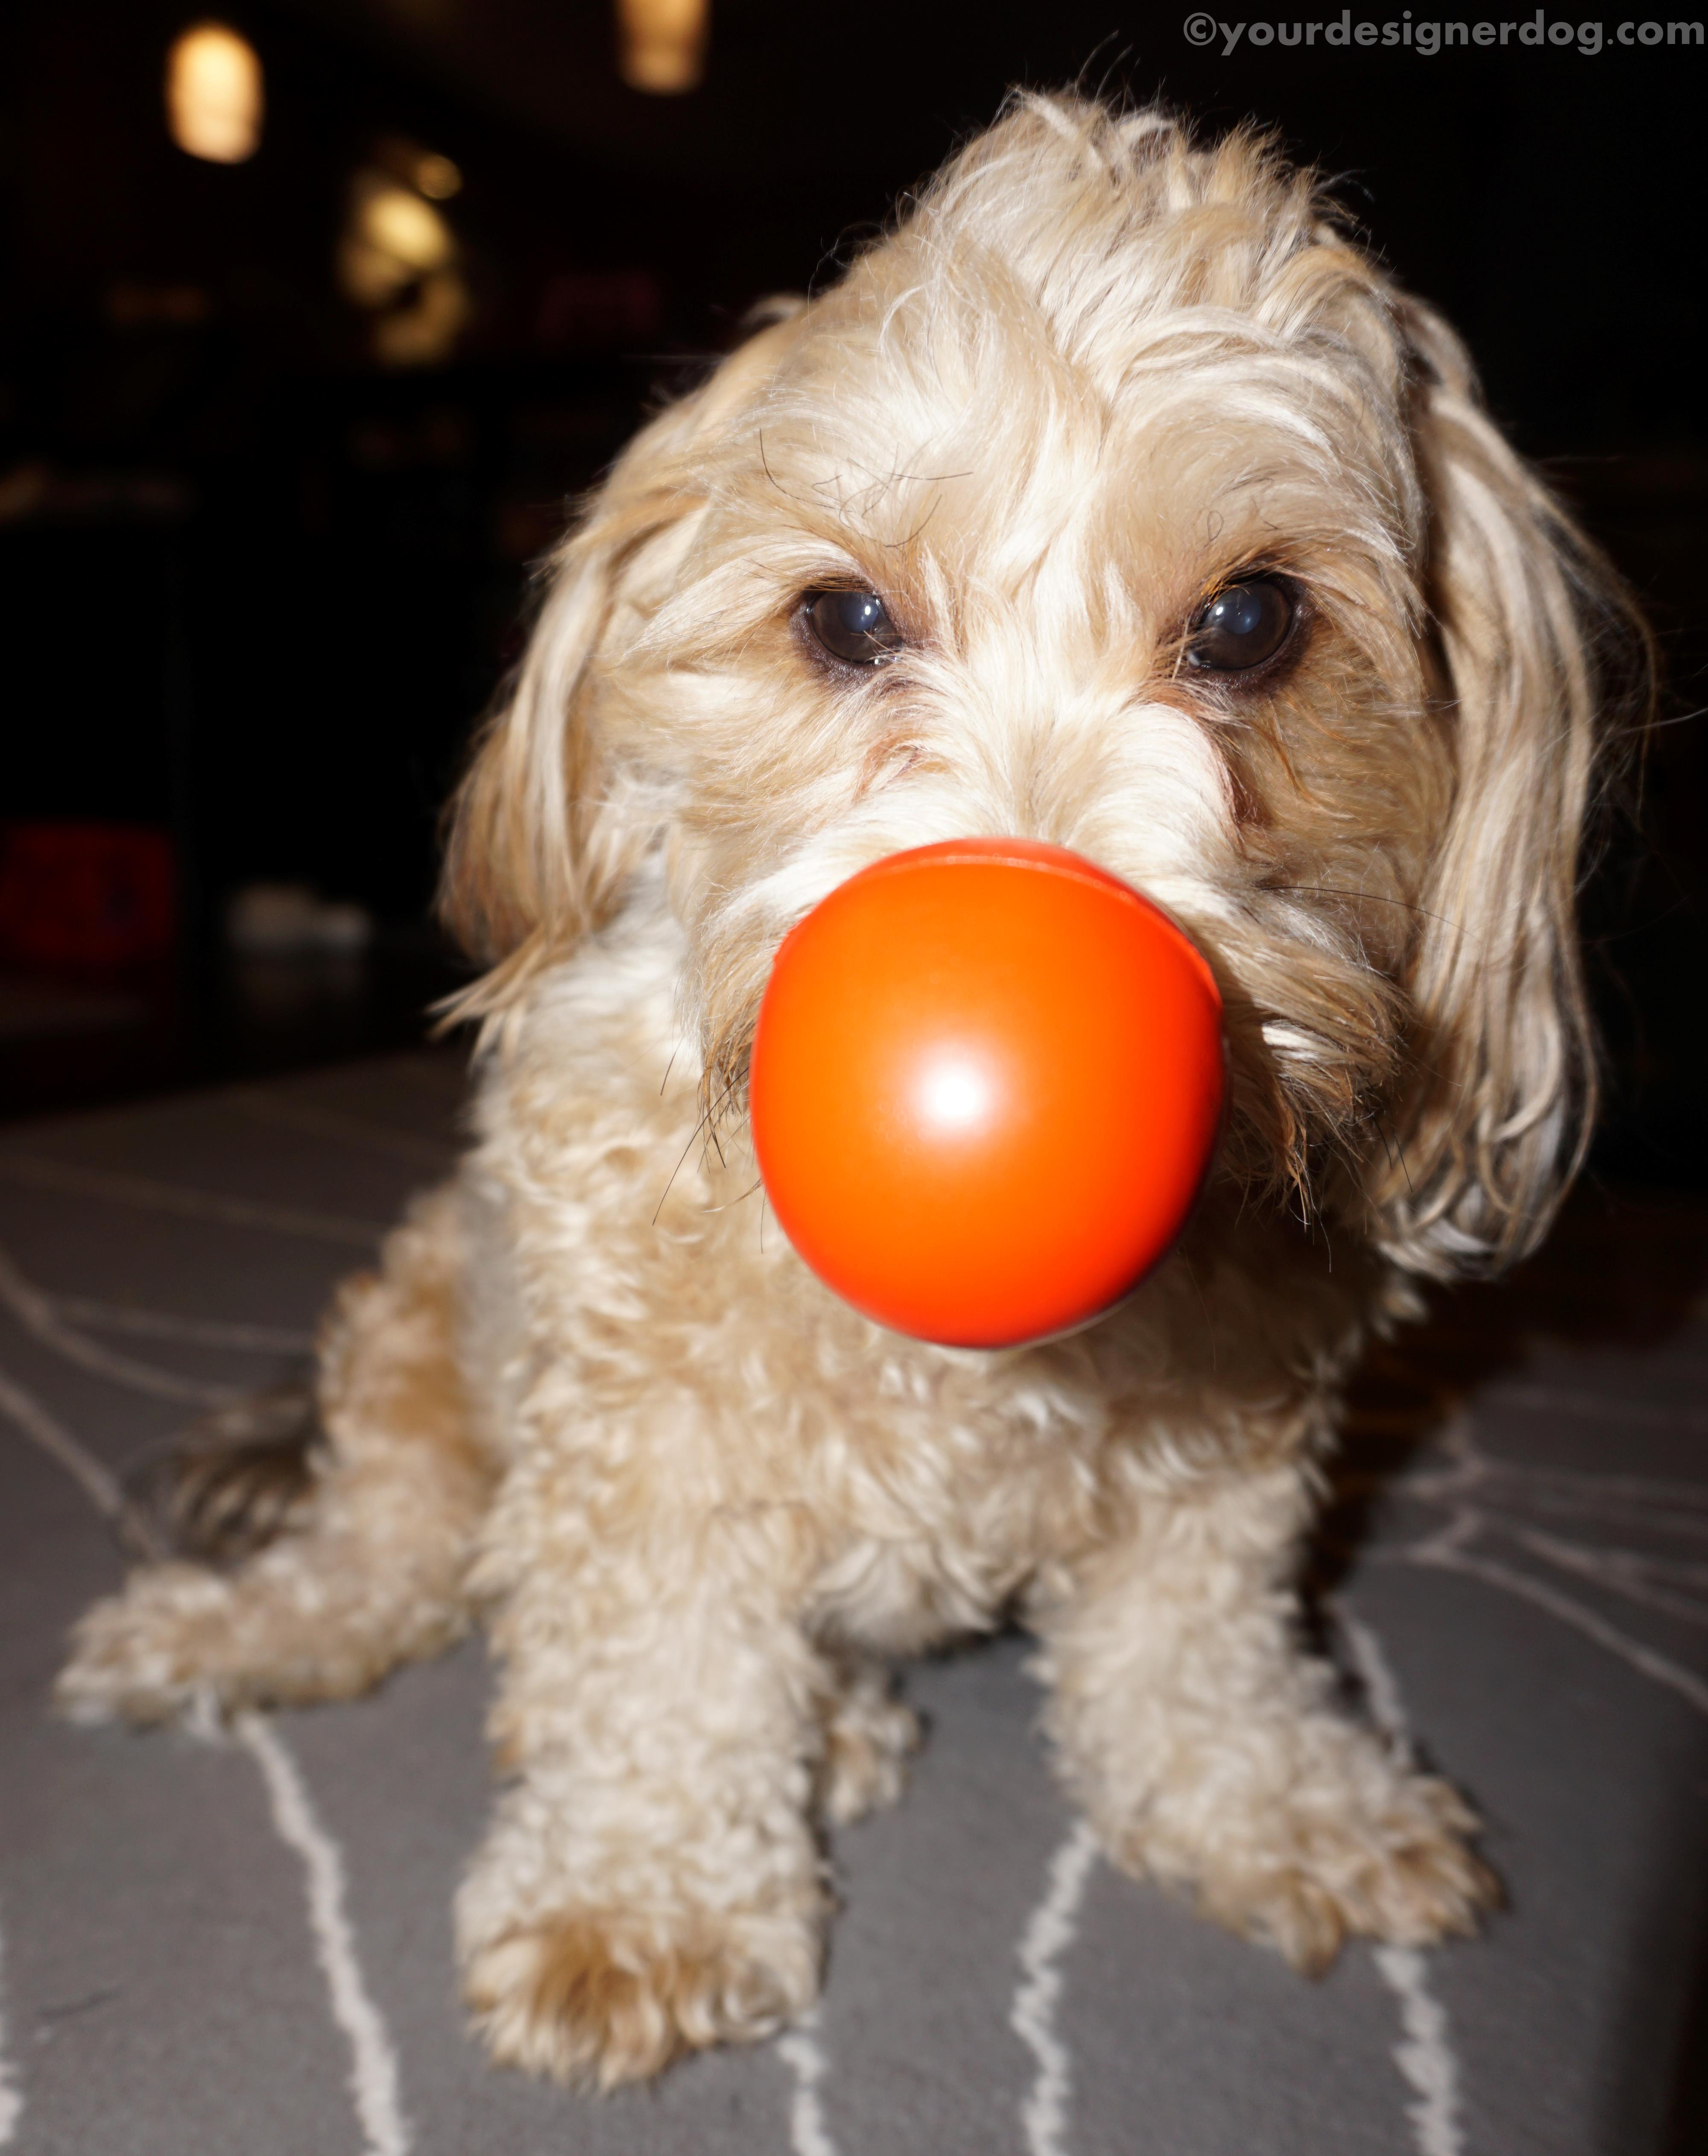 dogs, designer dogs, yorkipoo, yorkie poo, red nose, charity, comedy